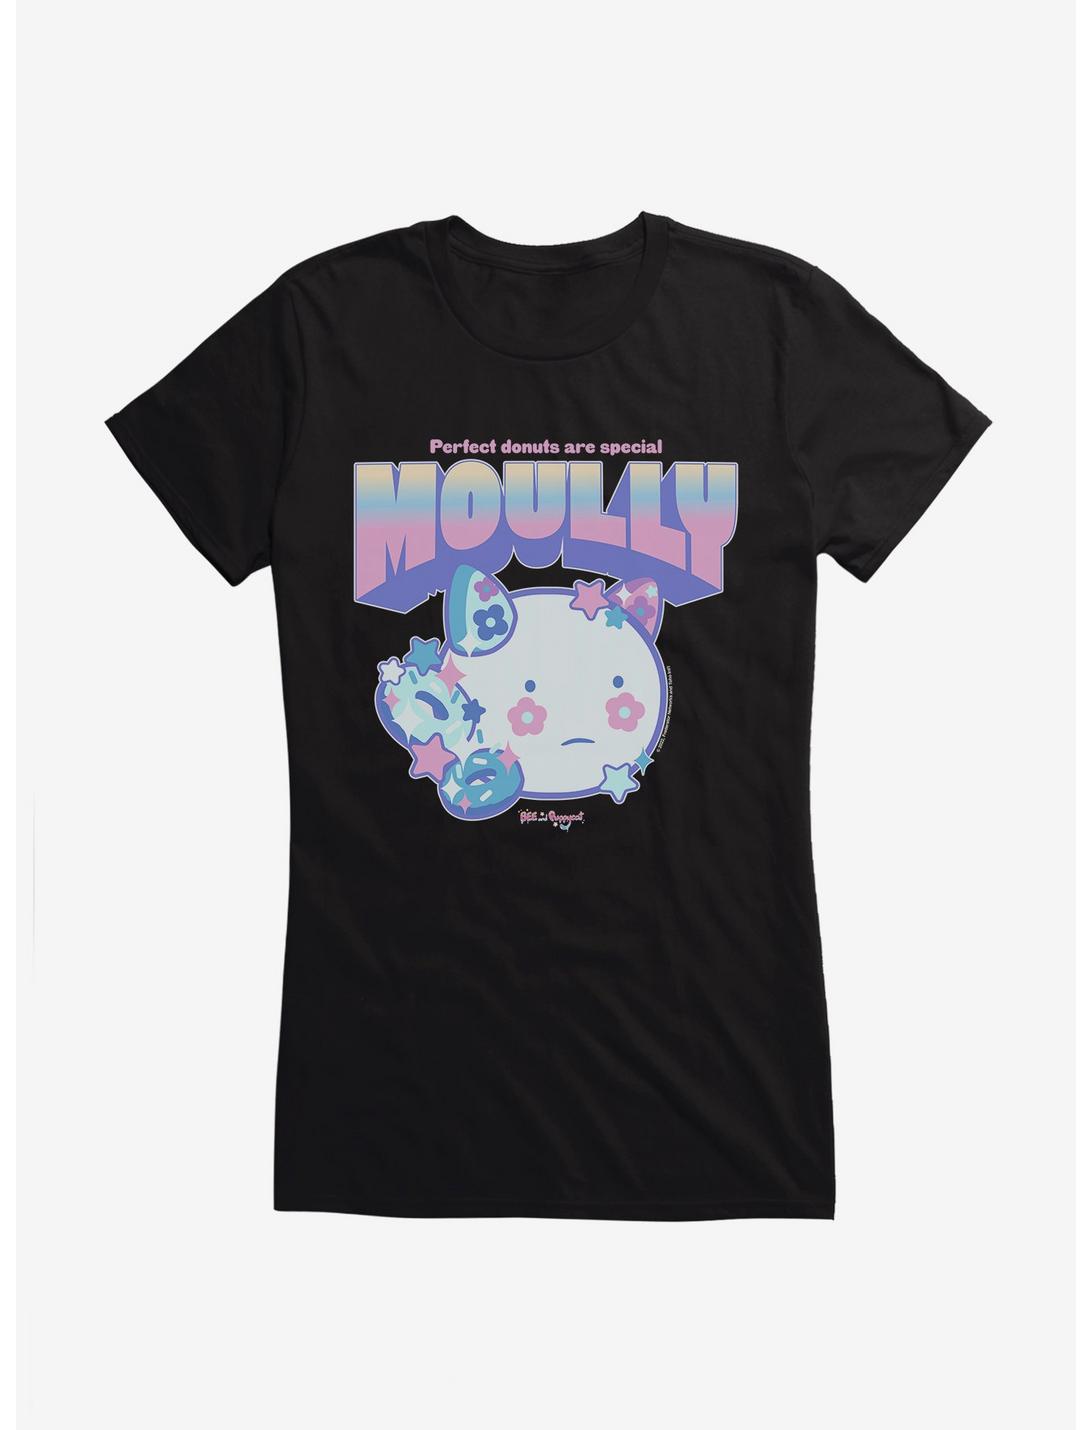 Bee and Puppycat Shop: Where Adorable Meets Style